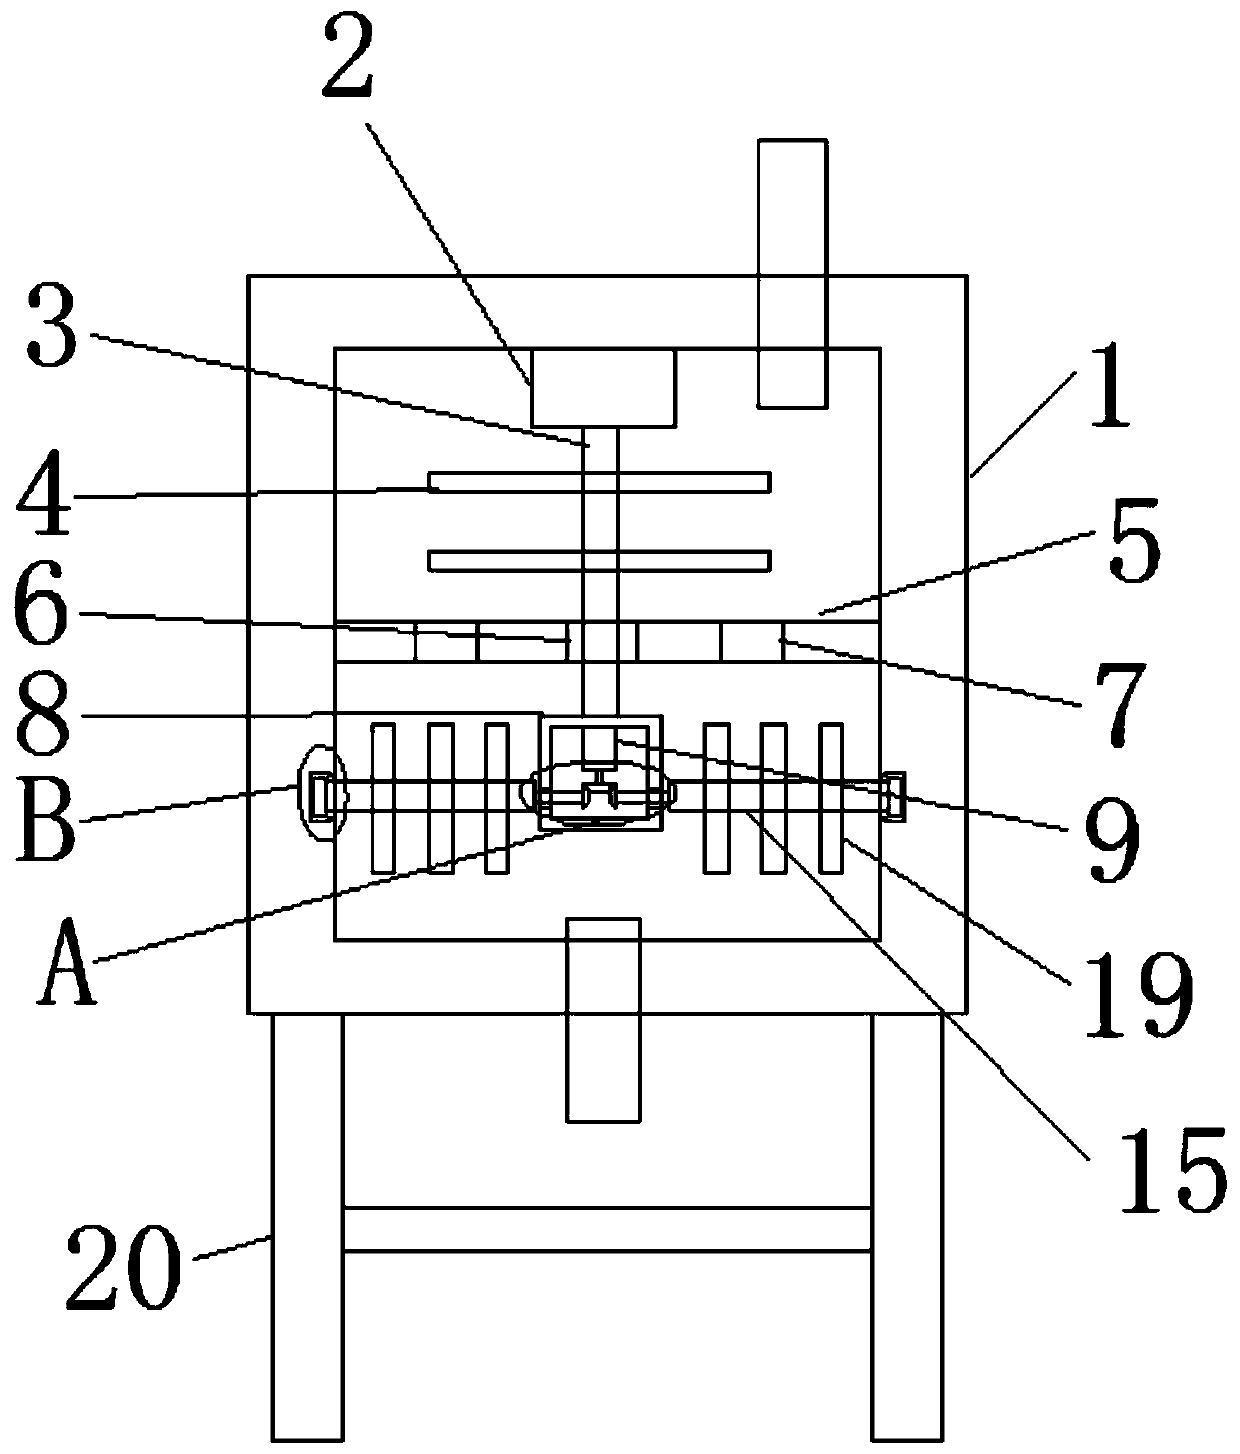 Mixing device for feed processing